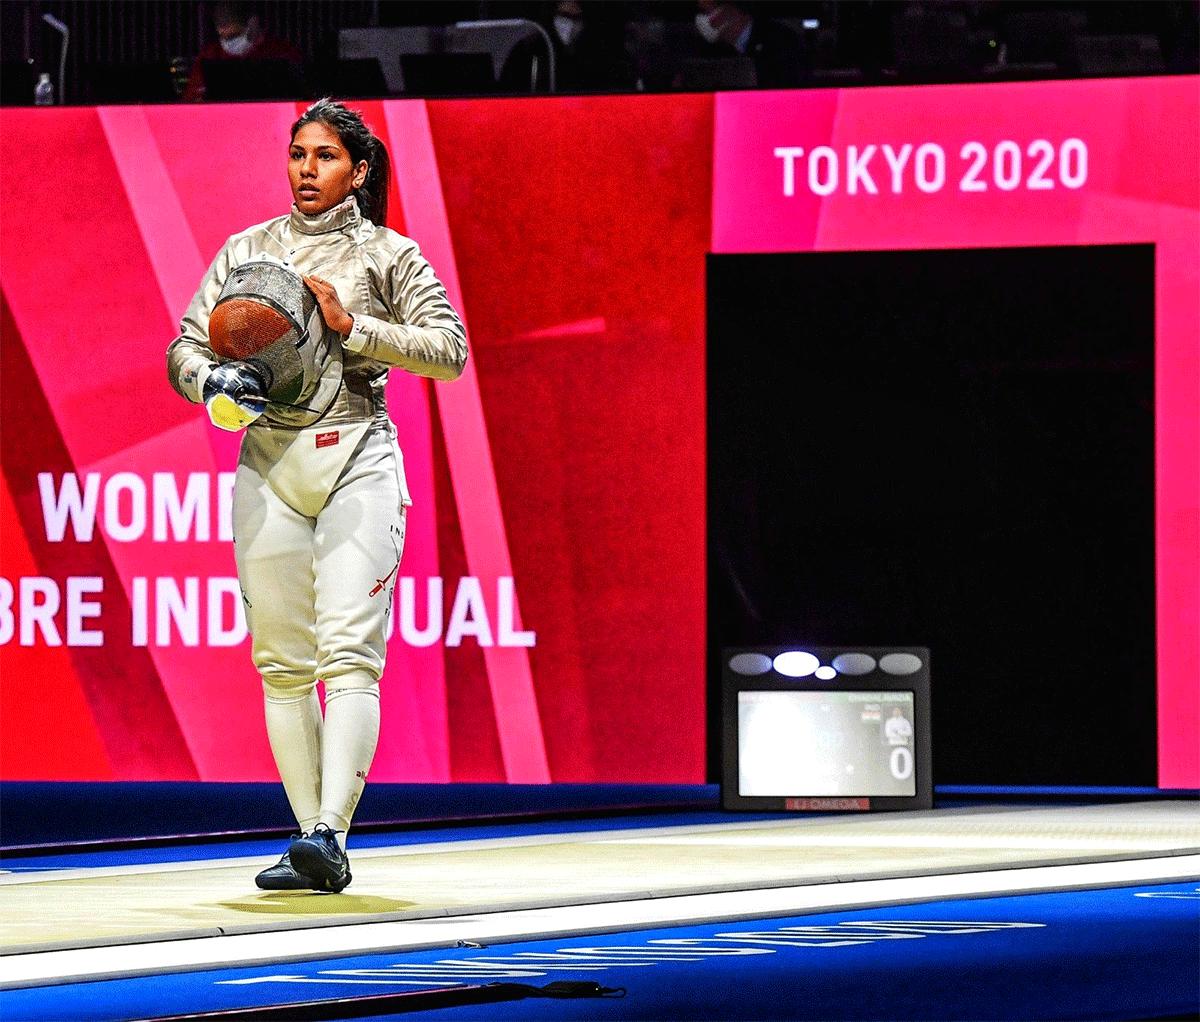 Bhavani Devi became the first fencer from India to register a win at the Olympics when she won her first round match in the individual sabre event on Monday. She bowed out after going down to Frenchwoman Manon Brunet in the next round. 